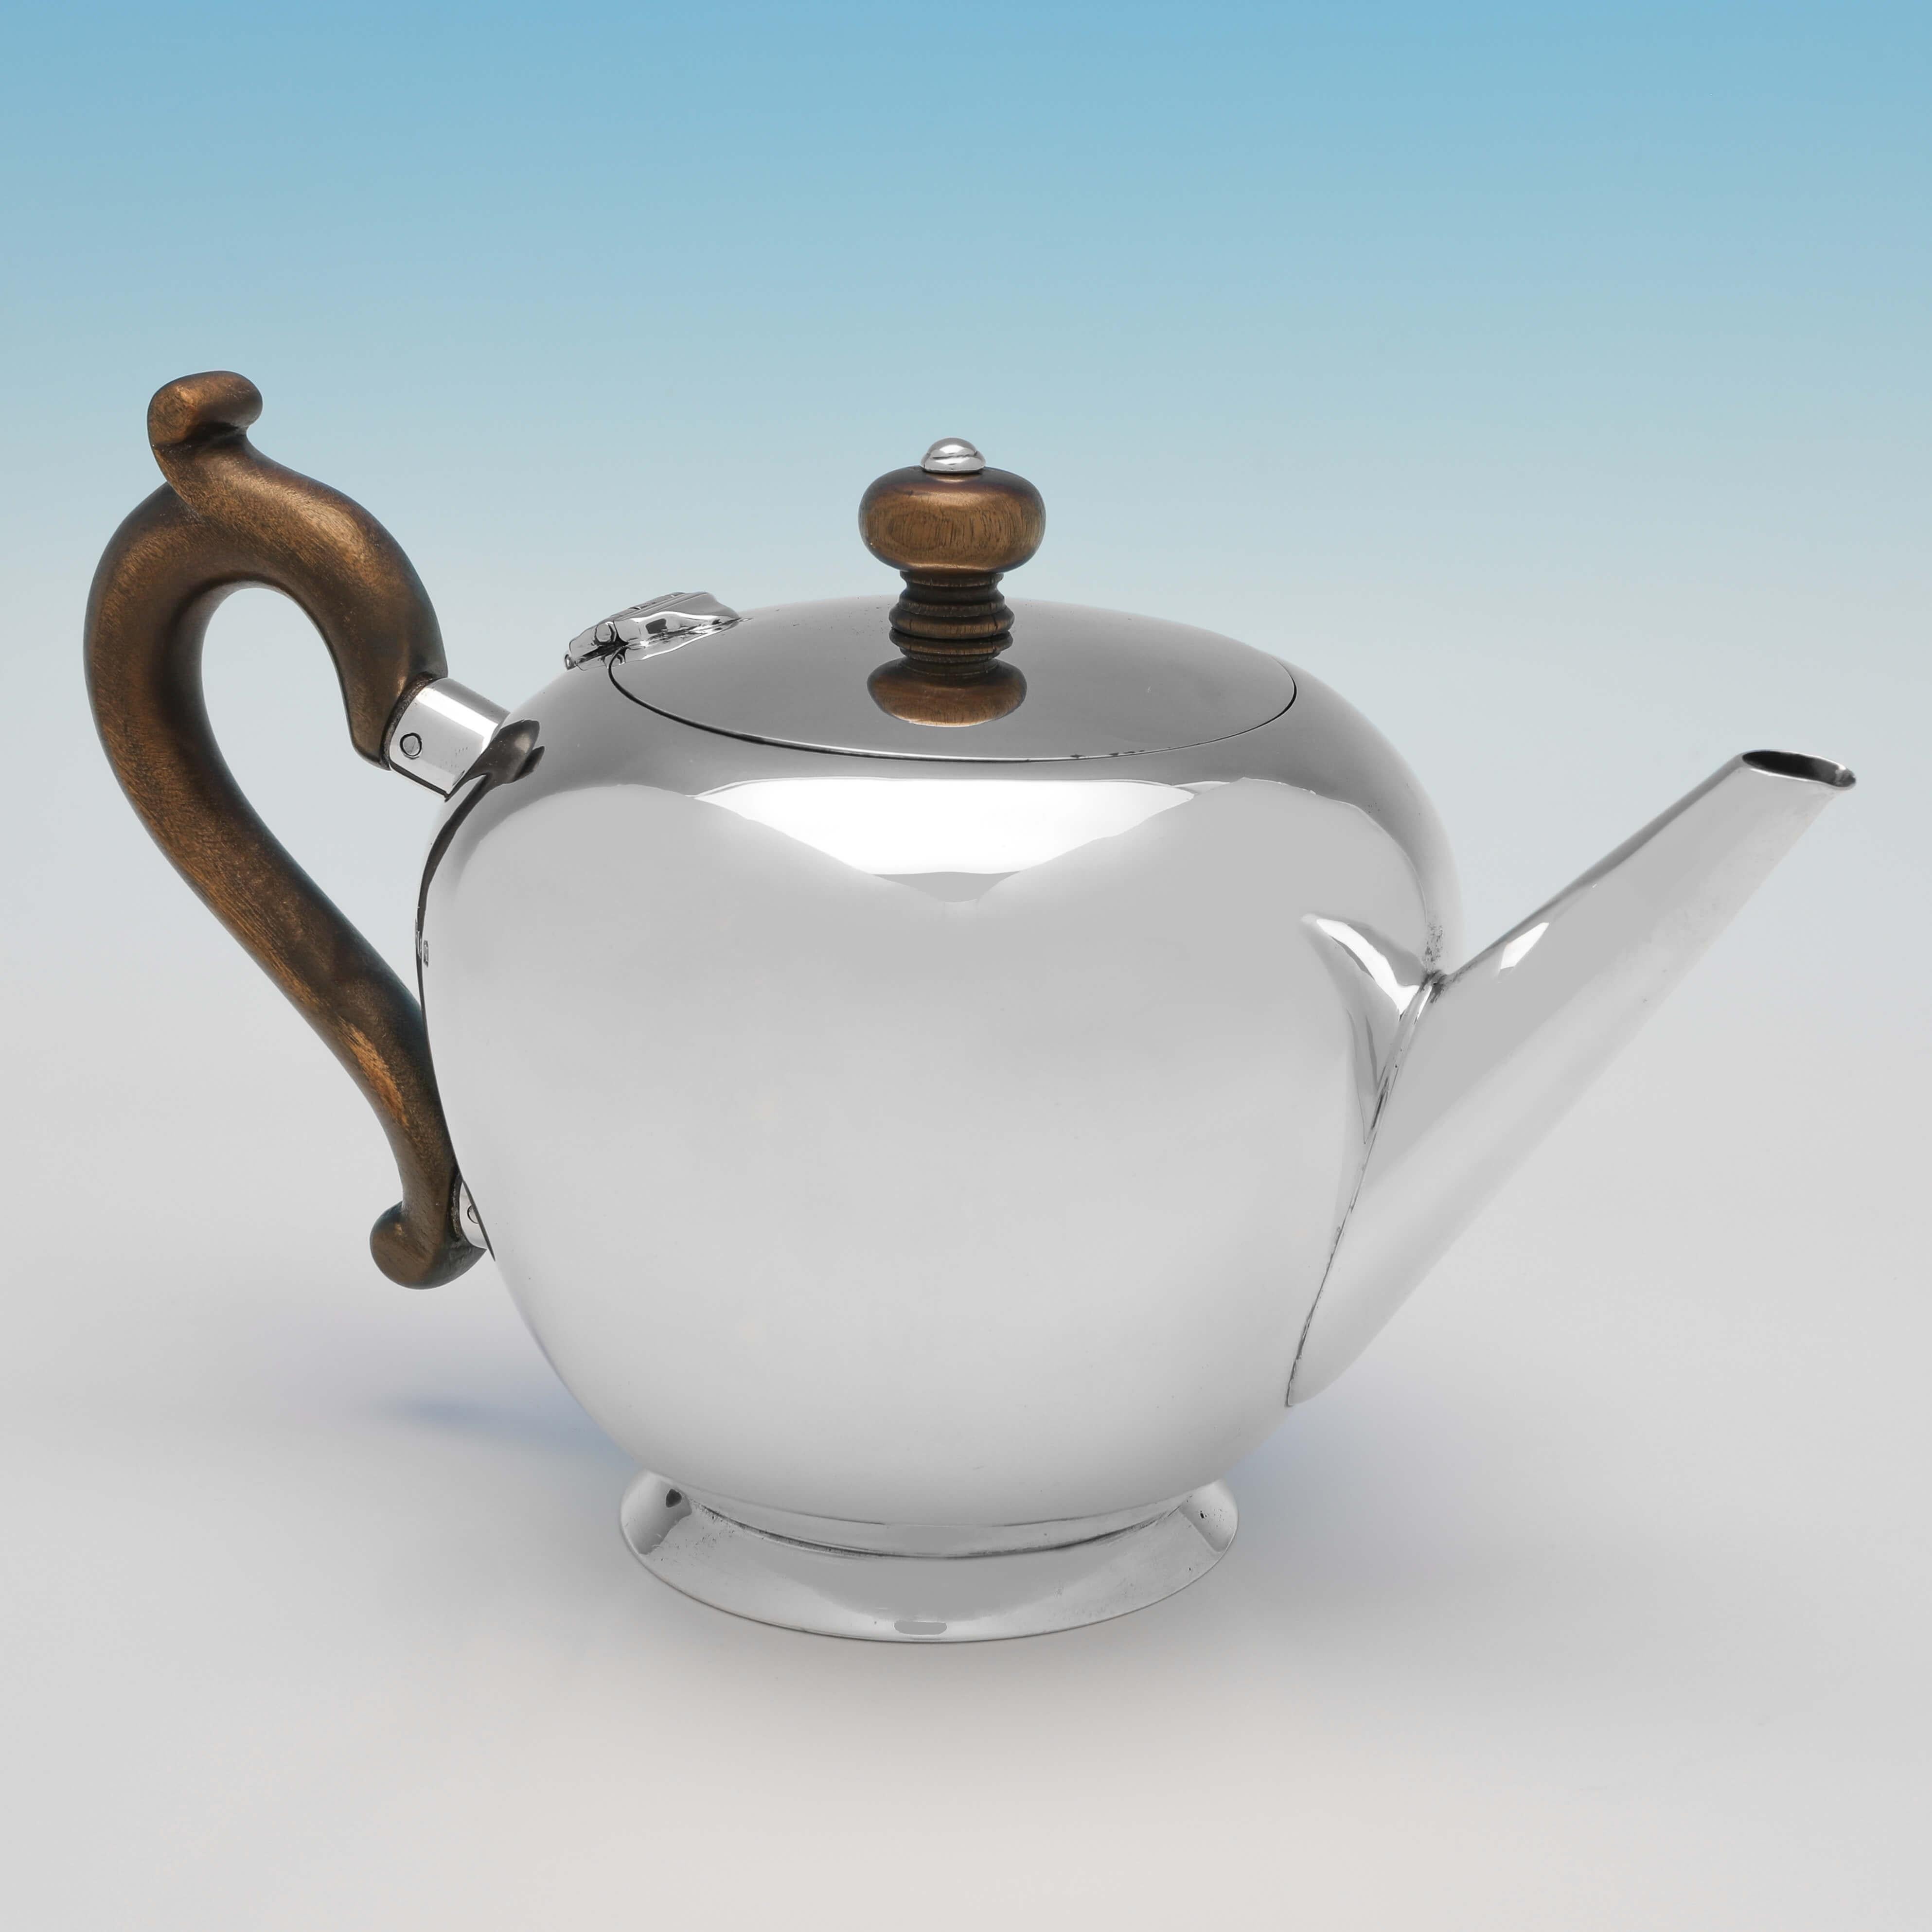 Hallmarked in London in 1931, this handsome, sterling silver teapot, is in the 'Bullet' shape, plain in style, and with a wooden handle and finial. The teapot measures 5.25